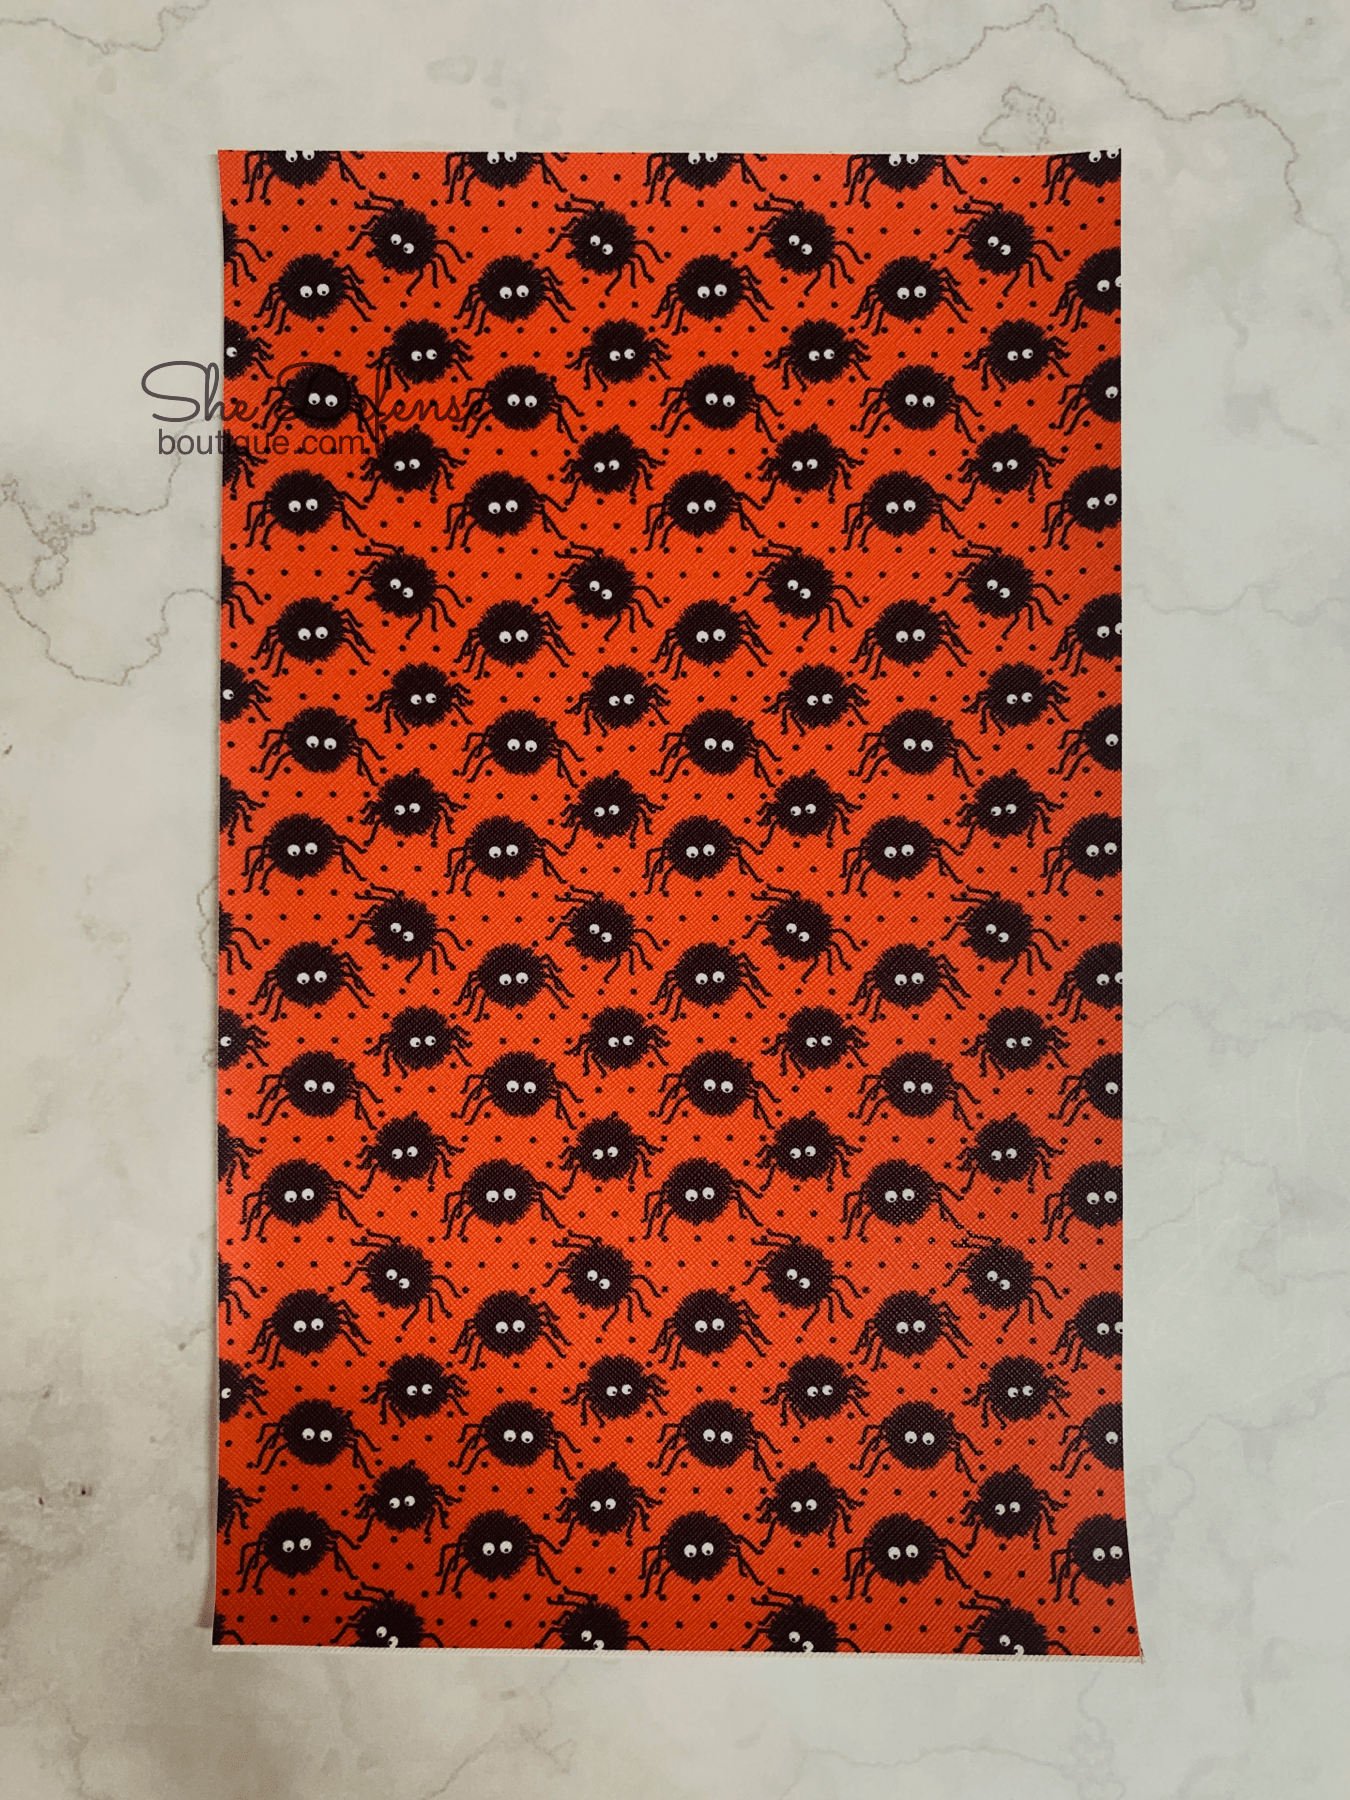 New 1pc Faux Leather Sheet F047-F049 Halloween Spiders